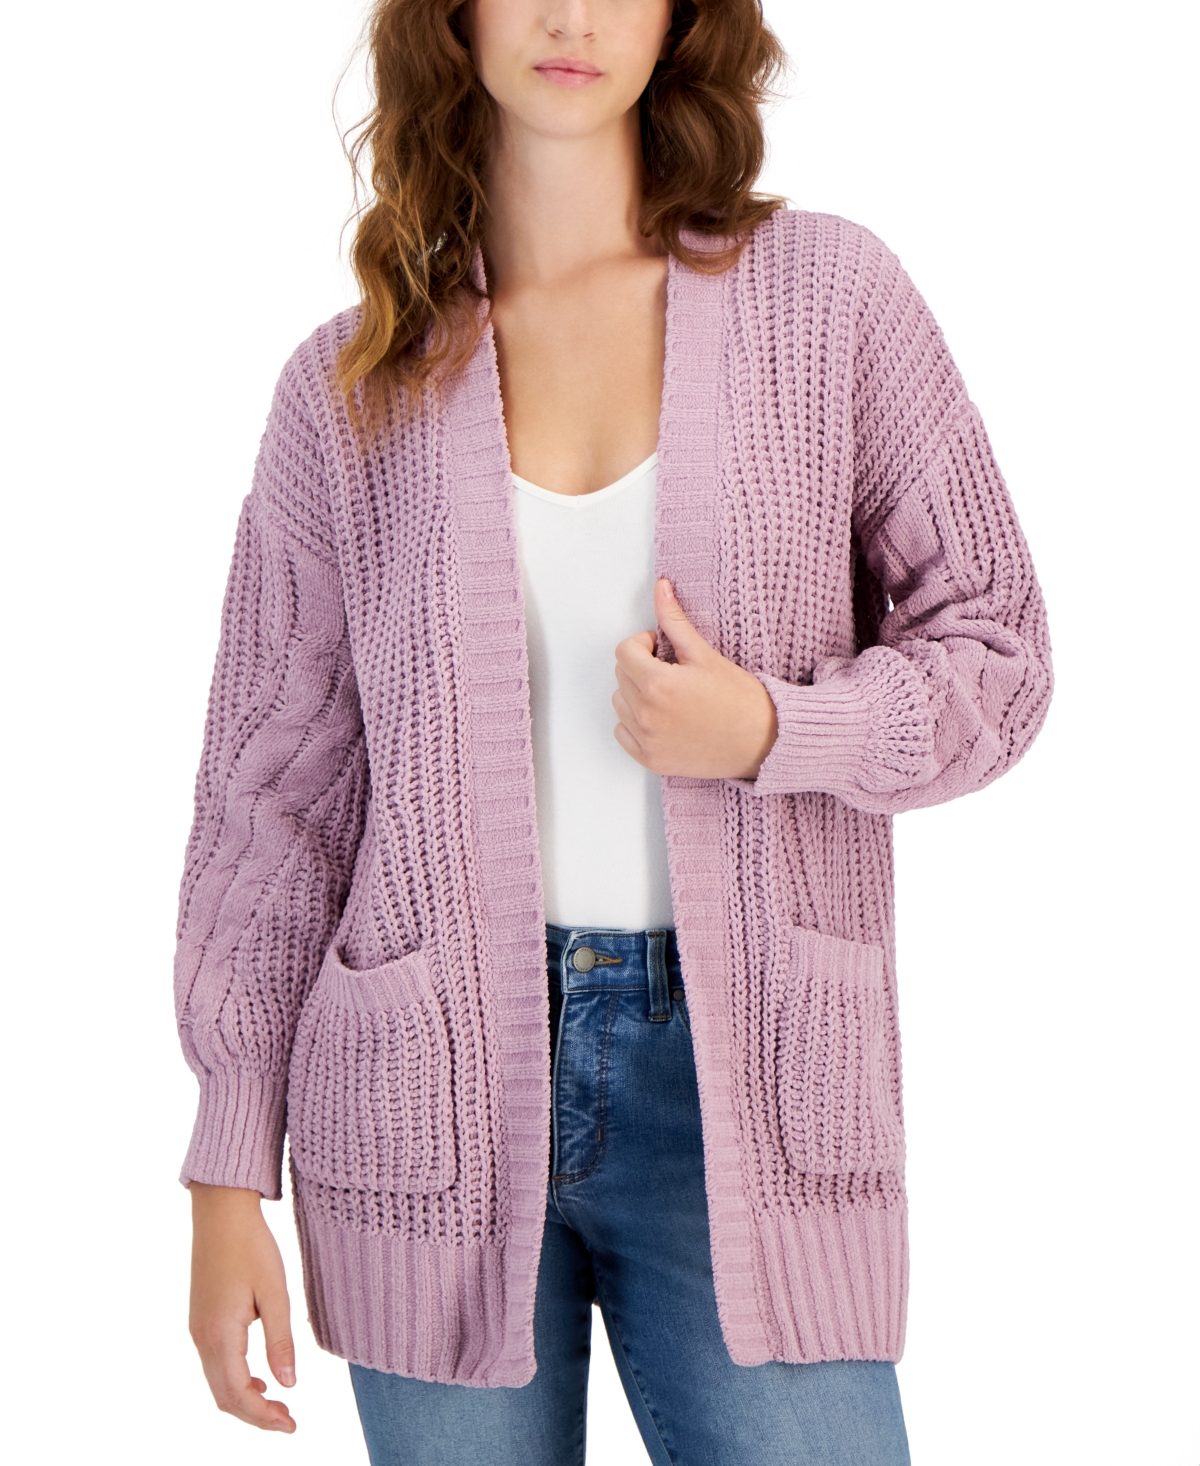 JUNIORS' COZY CHENILLE CABLE-KNIT CARDIGAN SWEATER IN DUSTY LILAC Hippie Rose gives you layerable style with this open-front, cable-knit cardigan sweater.